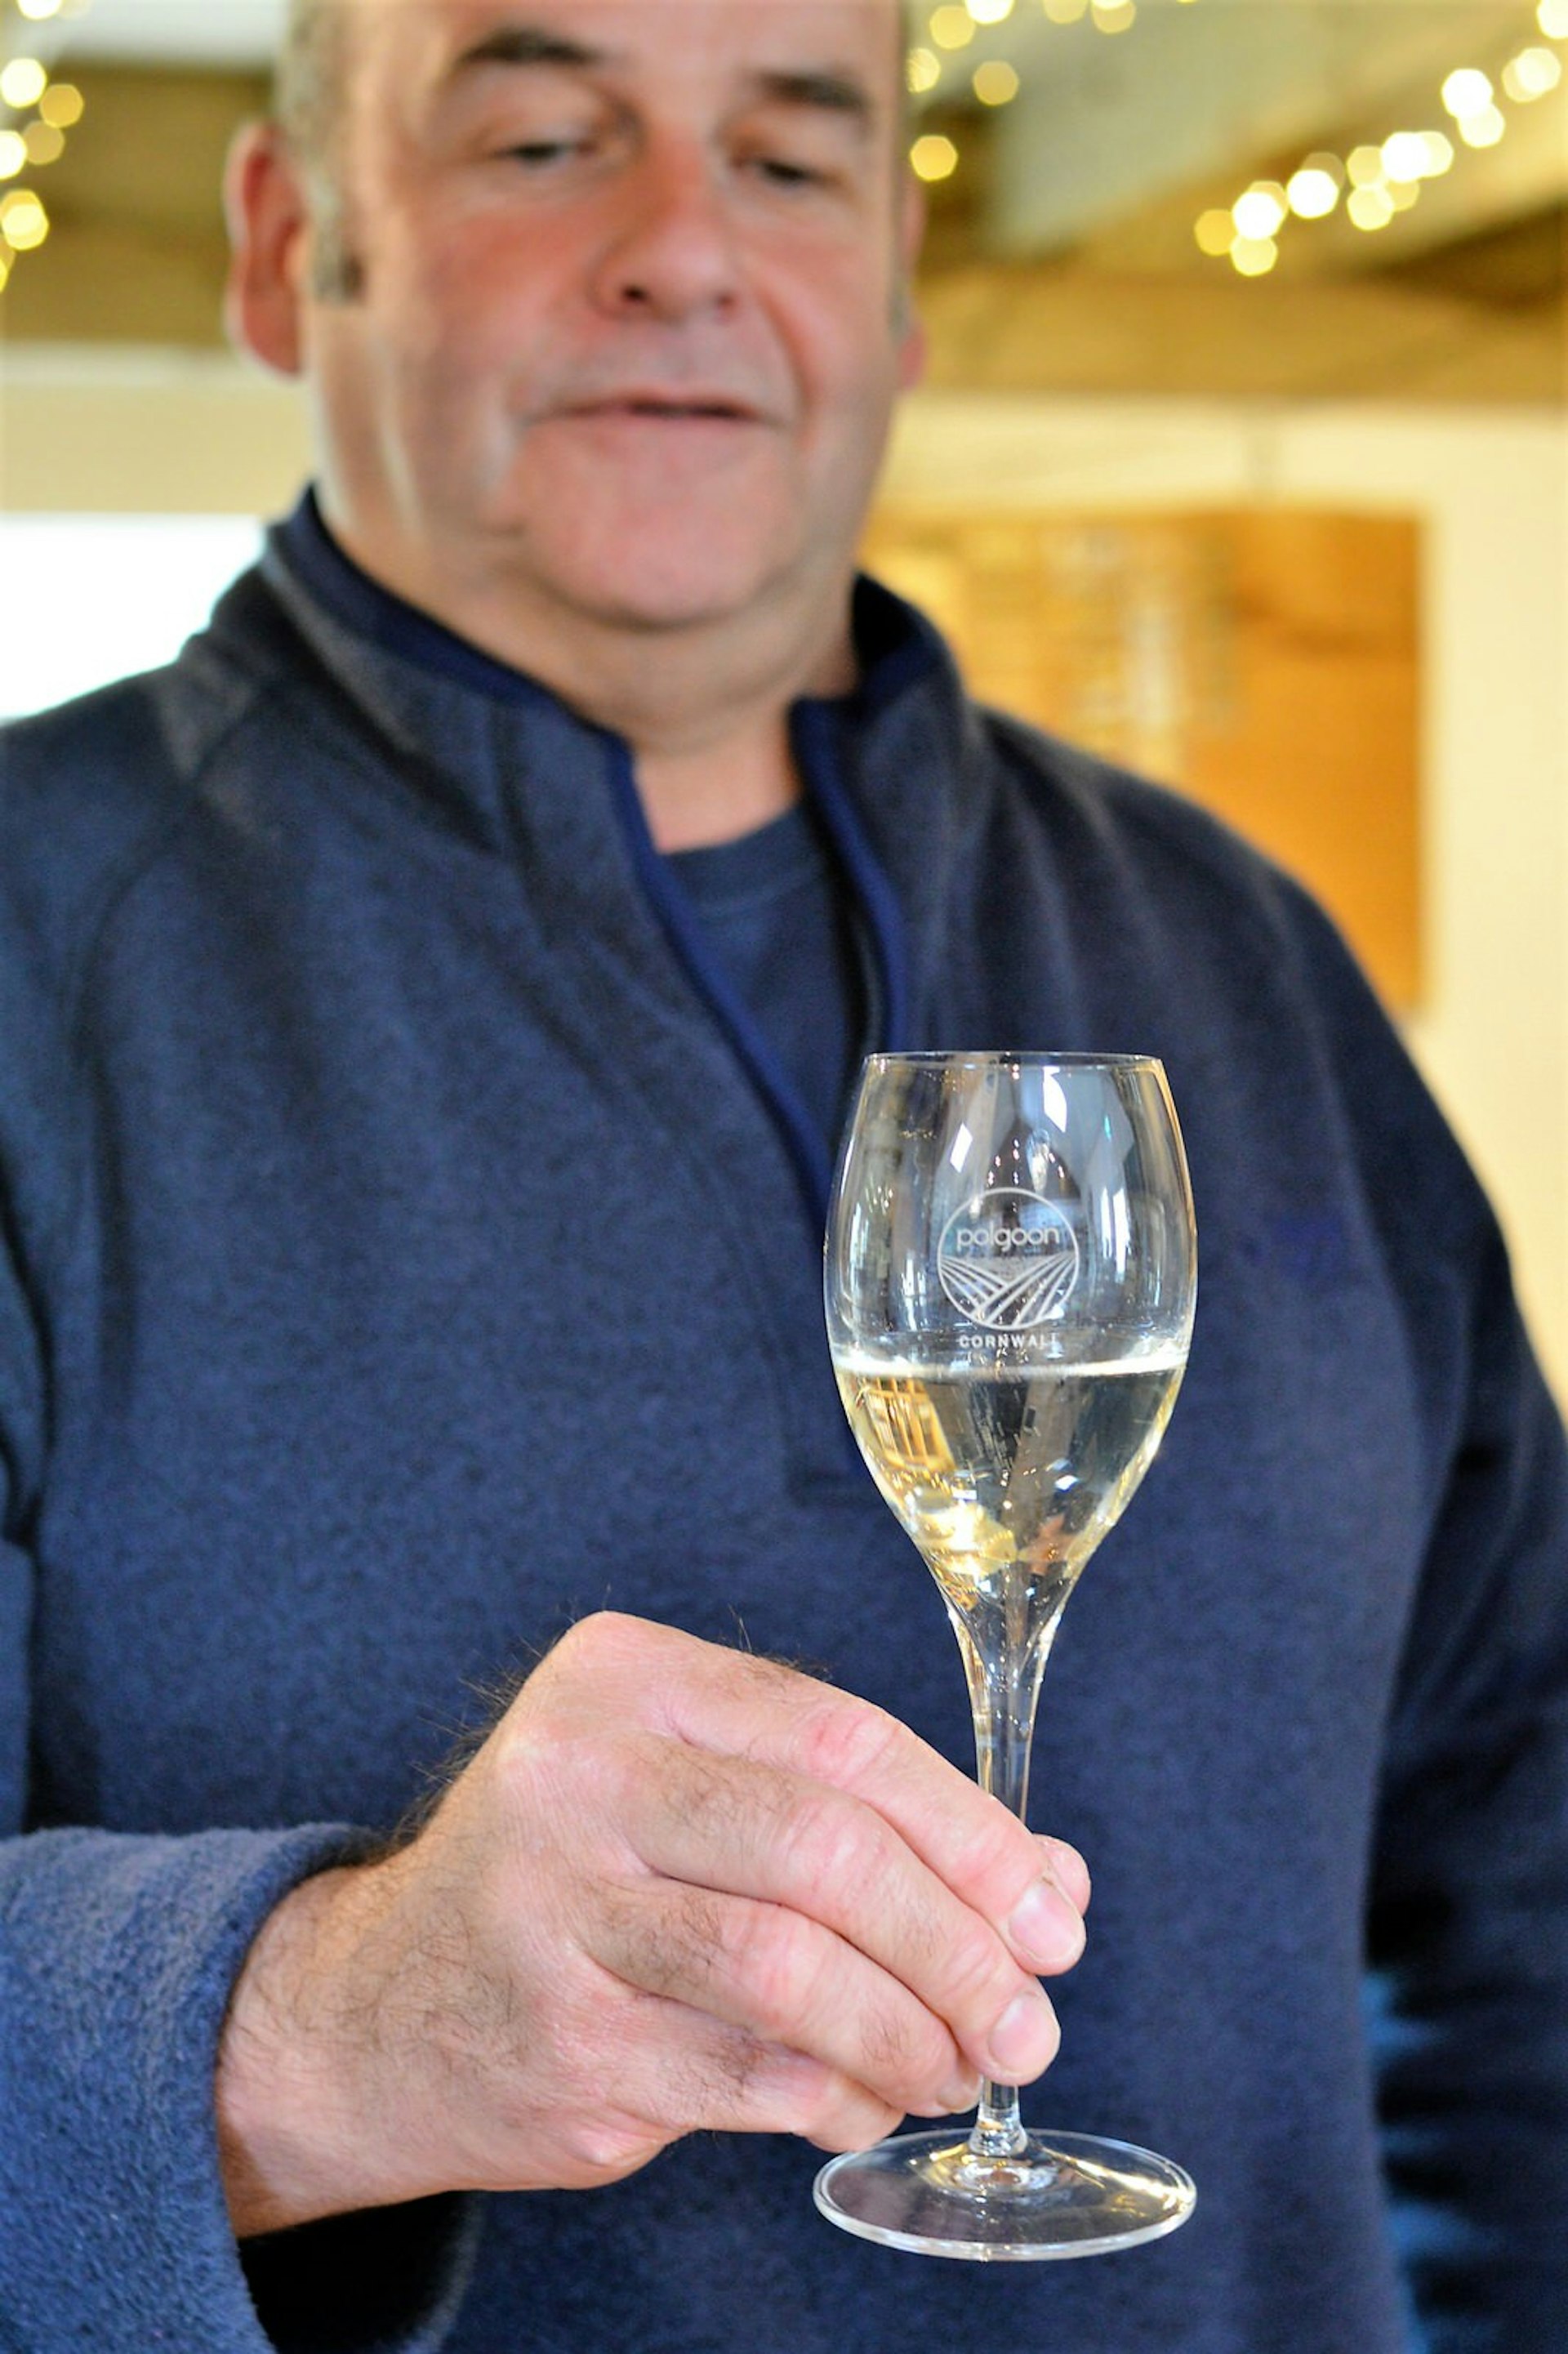 John, owner of Polgoon, admires one of his wines © Emma Sparks / Lonely Planet